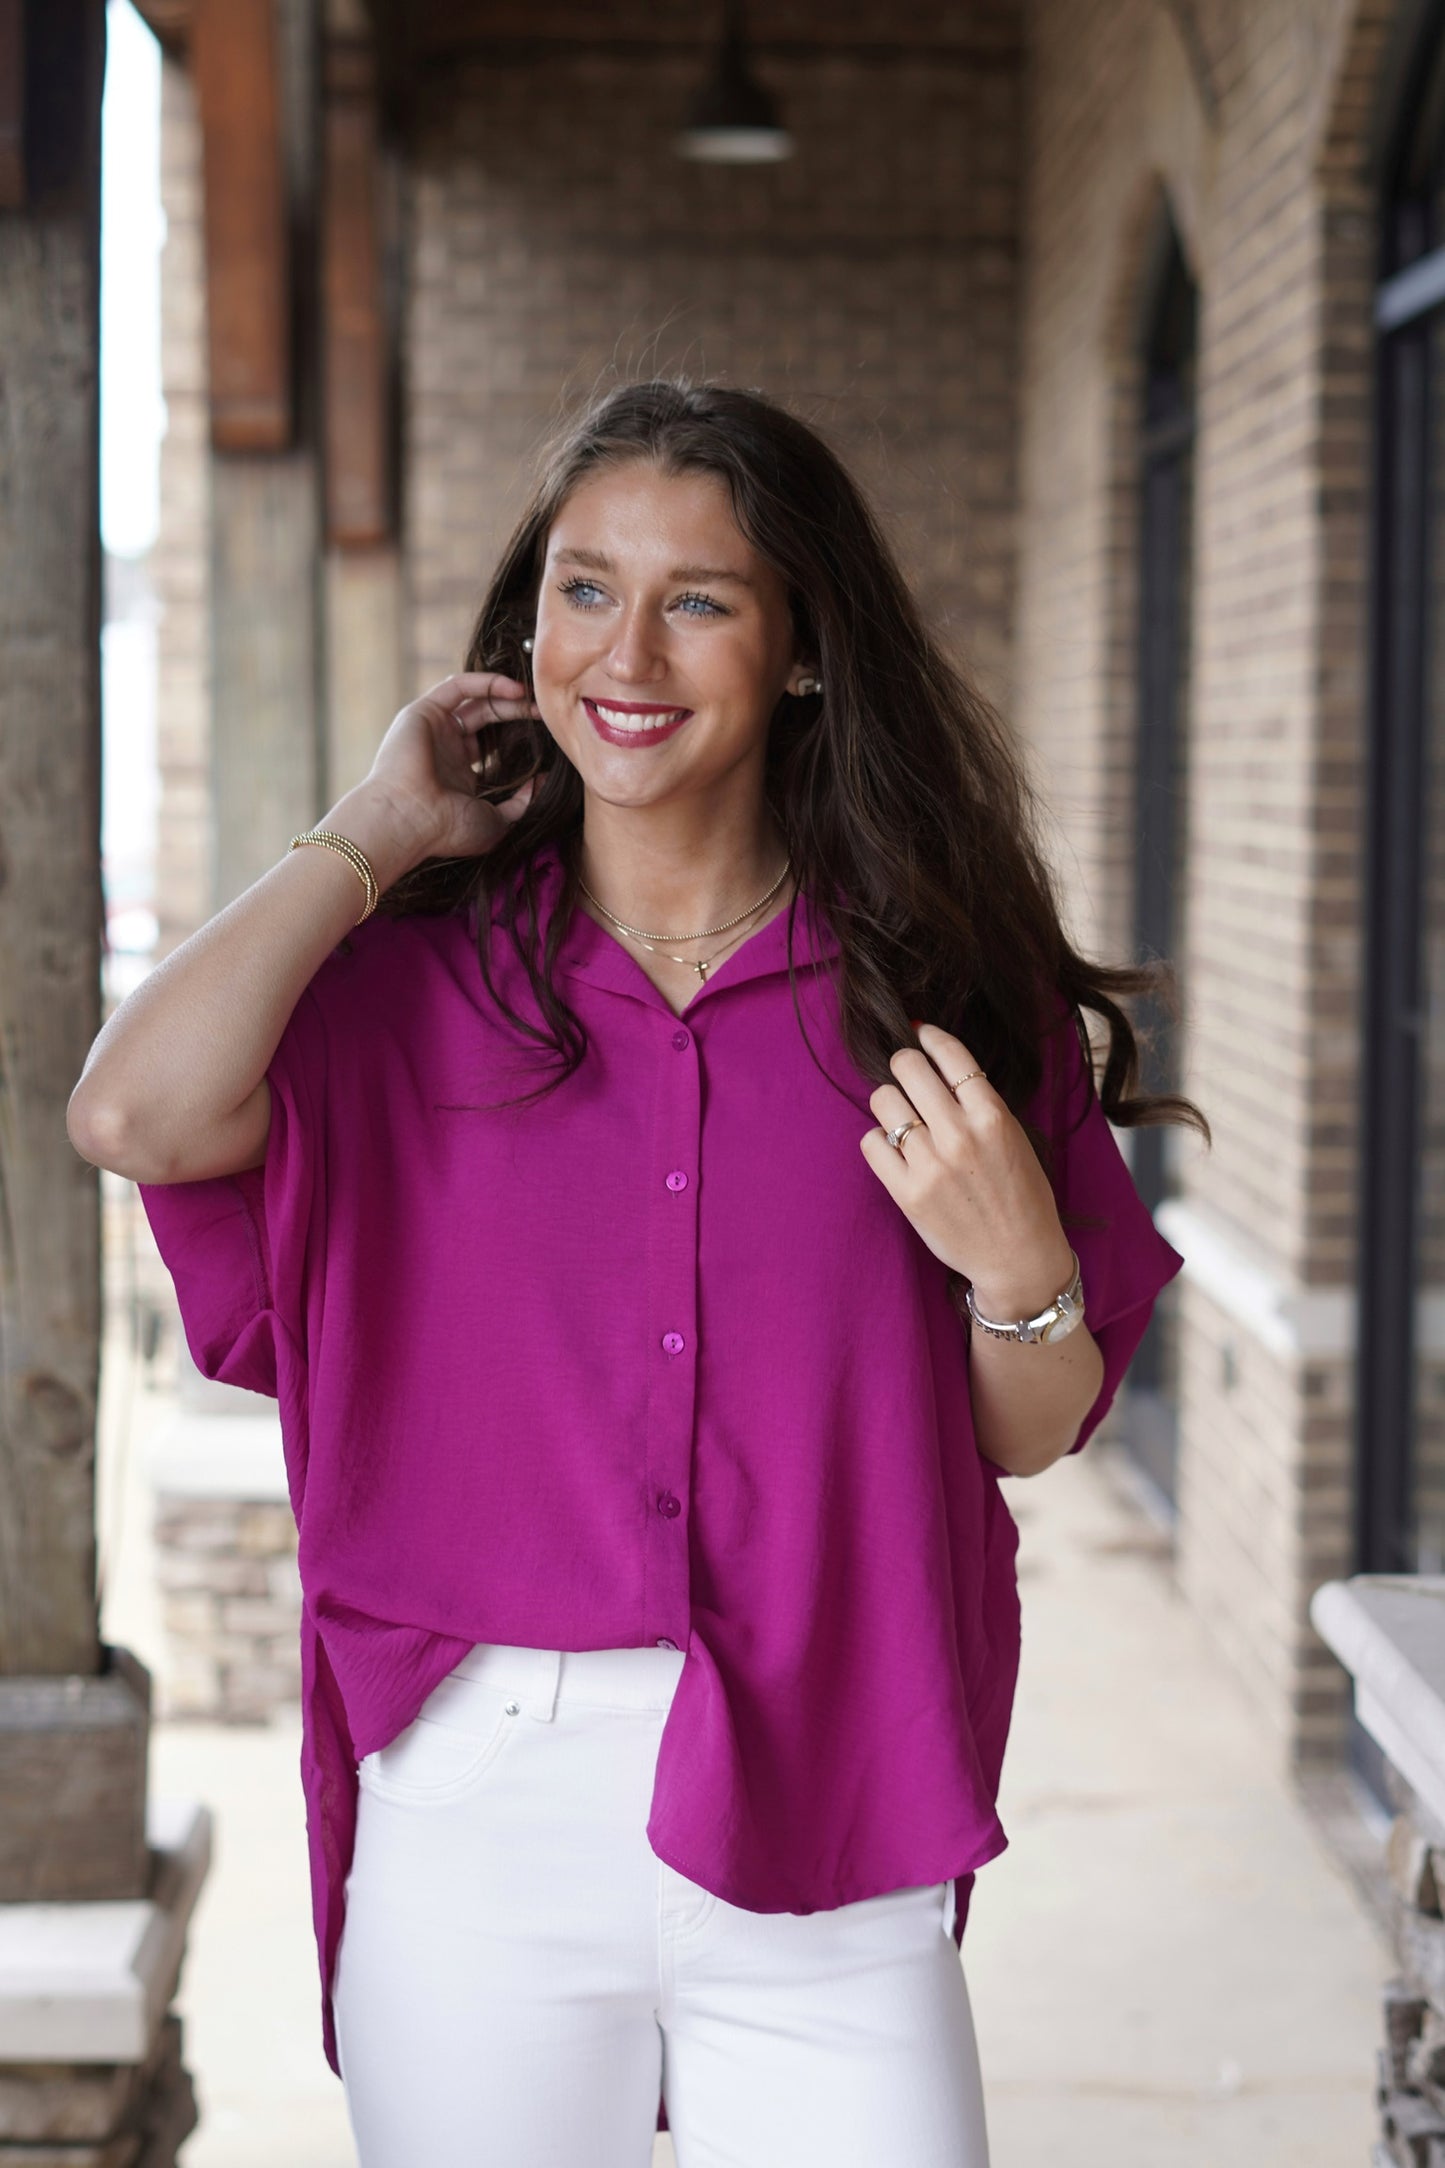 Colleen Collared Short Sleeve Blouse Collared Neckline Short Sleeves Button Up Detail Colors: Magenta, Relaxed Fit Full Length 95% Polyester, 5% Spandex